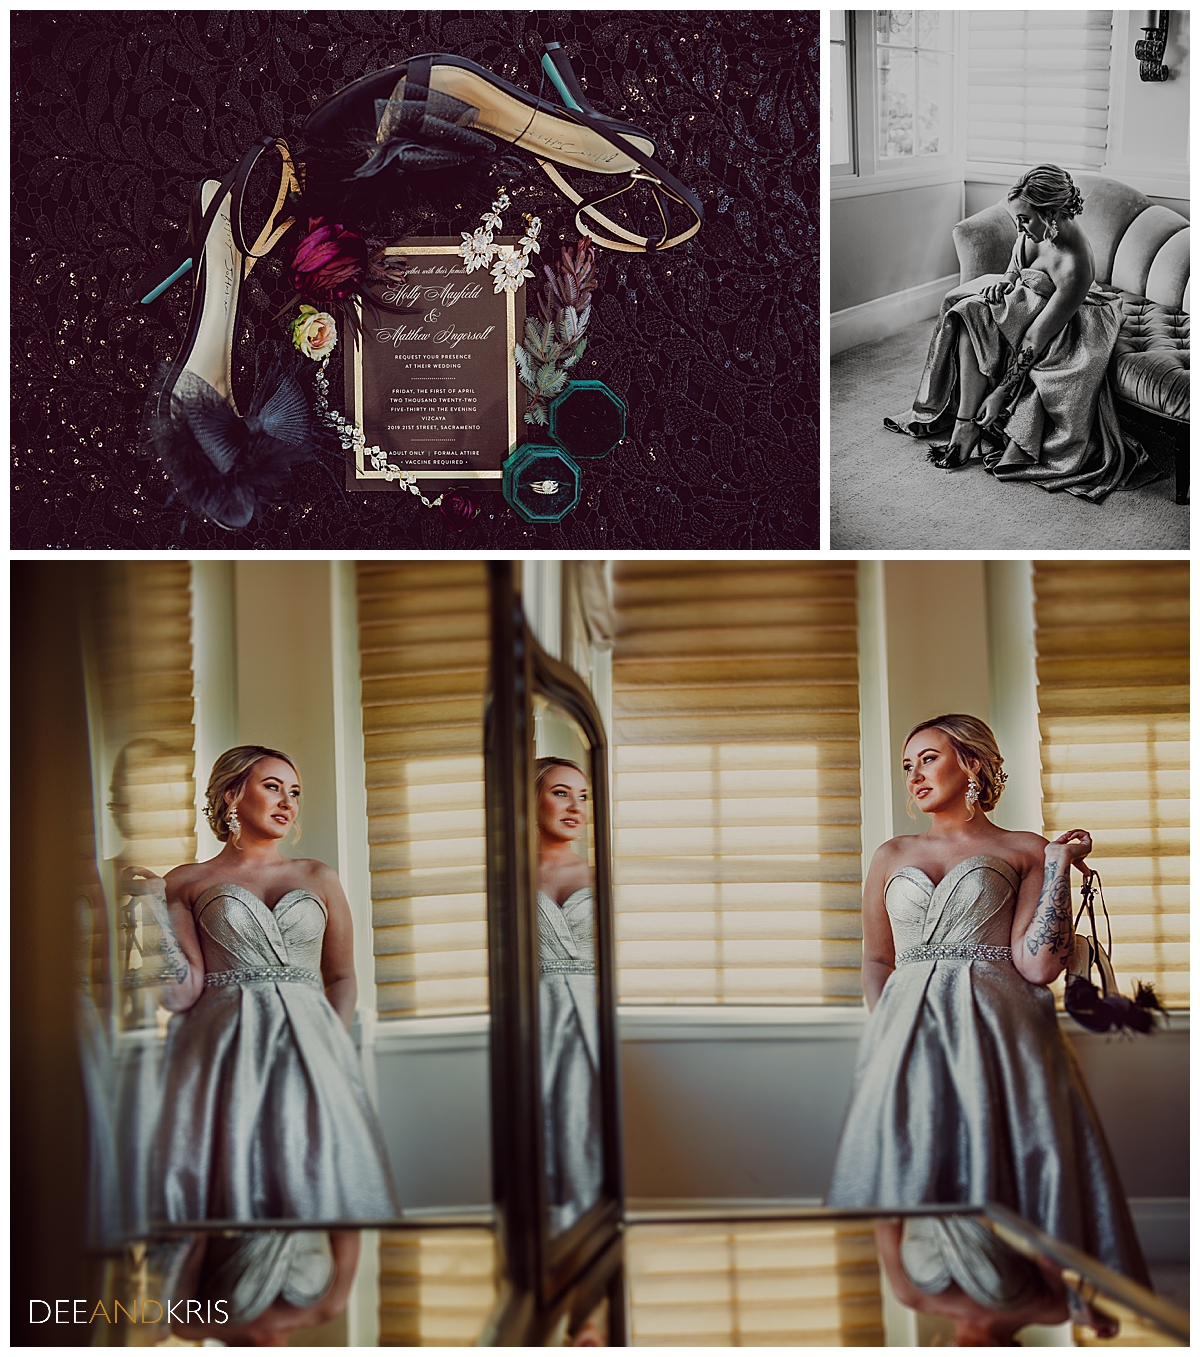 Three images: Top left layflat image of wedding details; invitation, jewelry, shoes, flowers. Top right black and white image of bride seated on settee putting shoes on. Bottom image of bride and her reflection holding shoes.